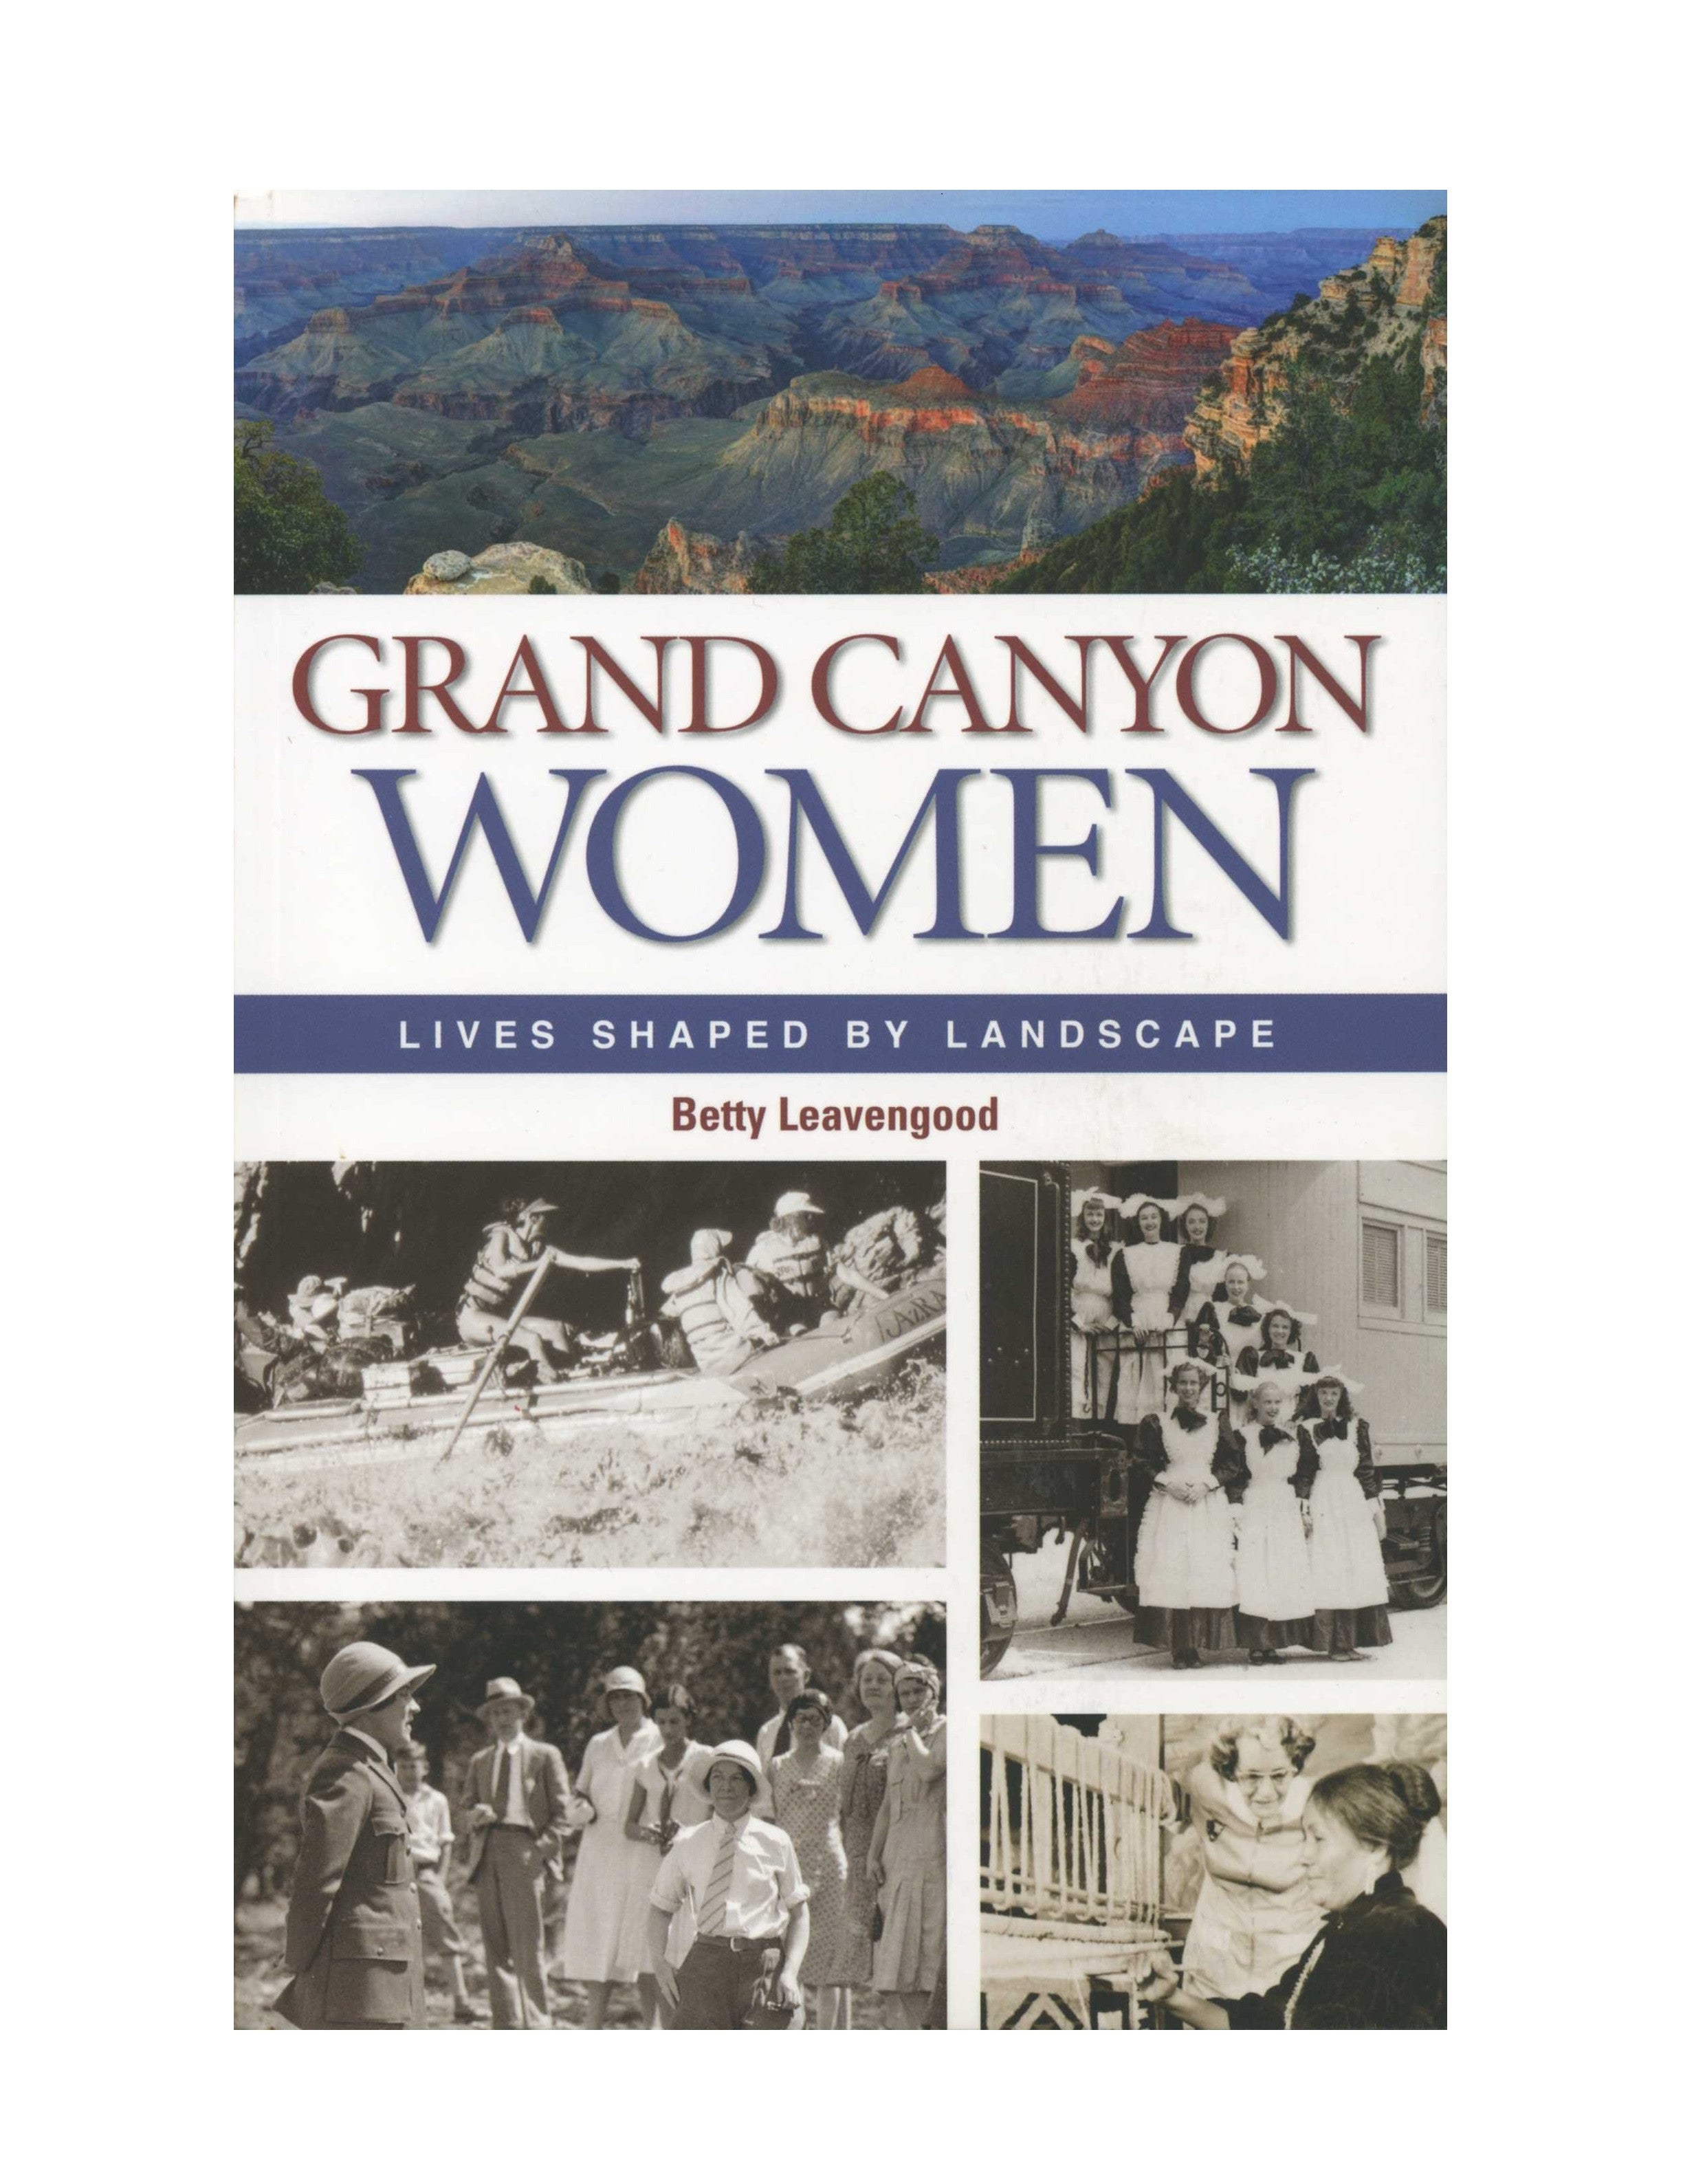 Grand Canyon Women - Lives Shaped by Landscape